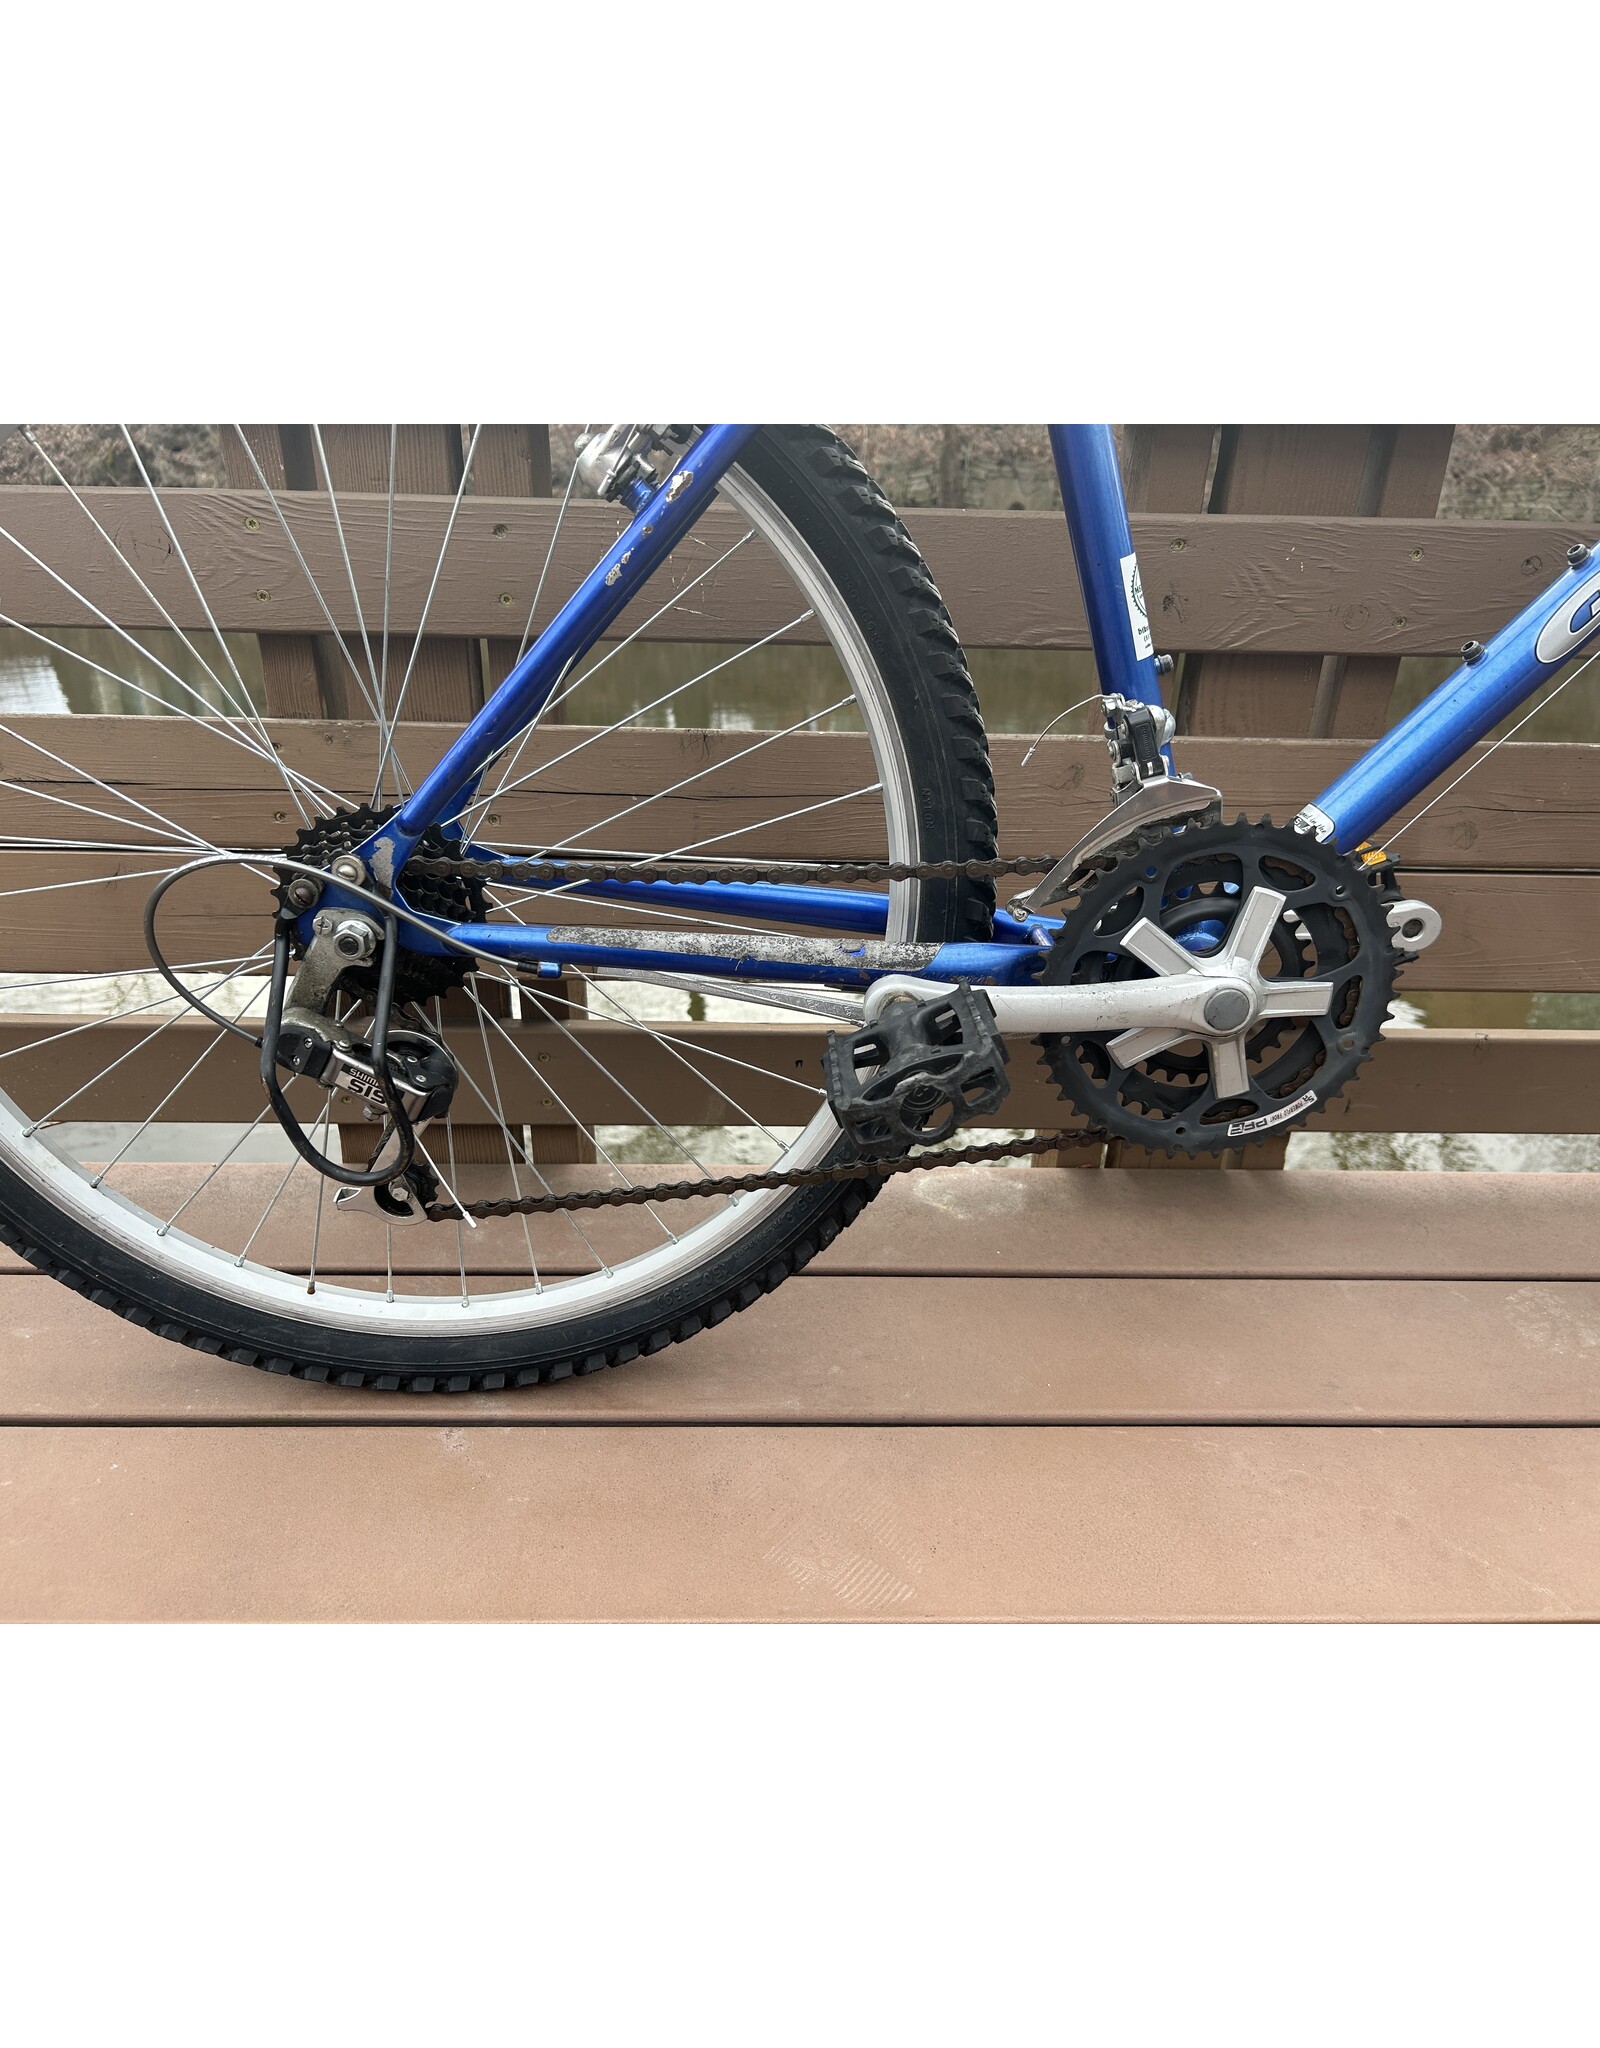 Giant Upland MTB, 16 in, blue